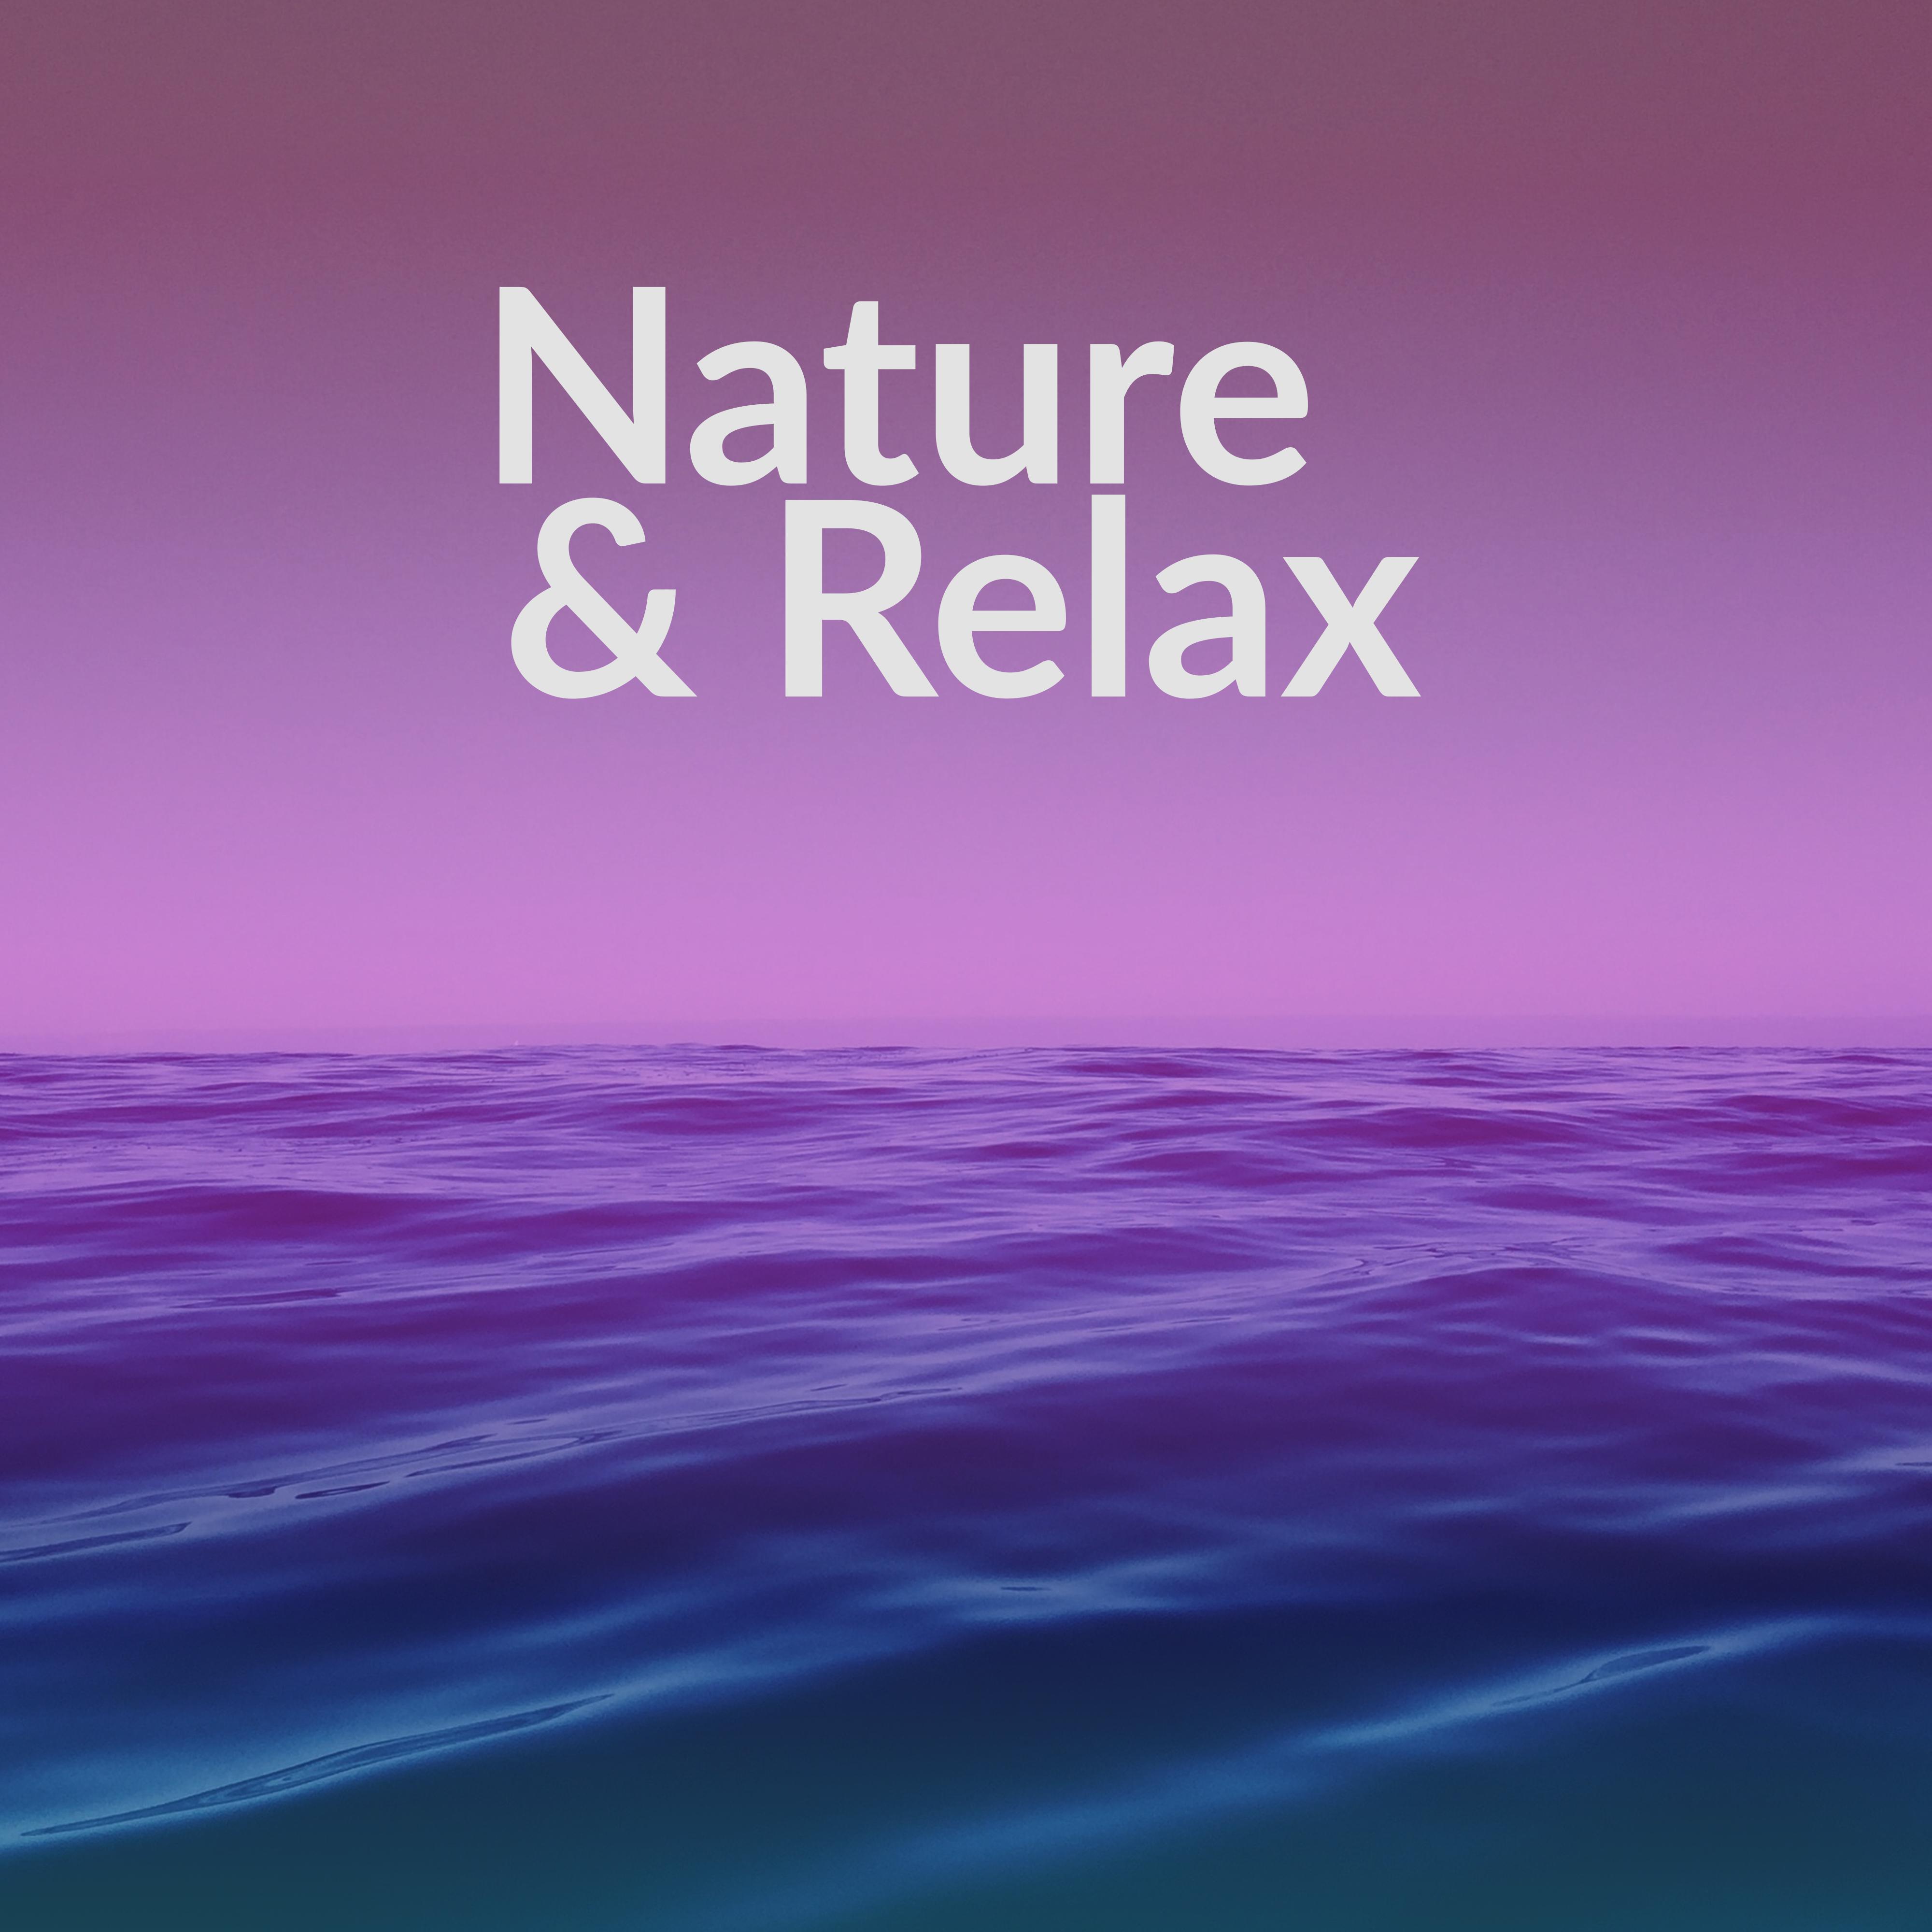 Nature & Relax – Nature Sounds, Relaxing Ocean Waves, Deep Sleep, Water Sounds, Soothing Guitar, Healing Piano